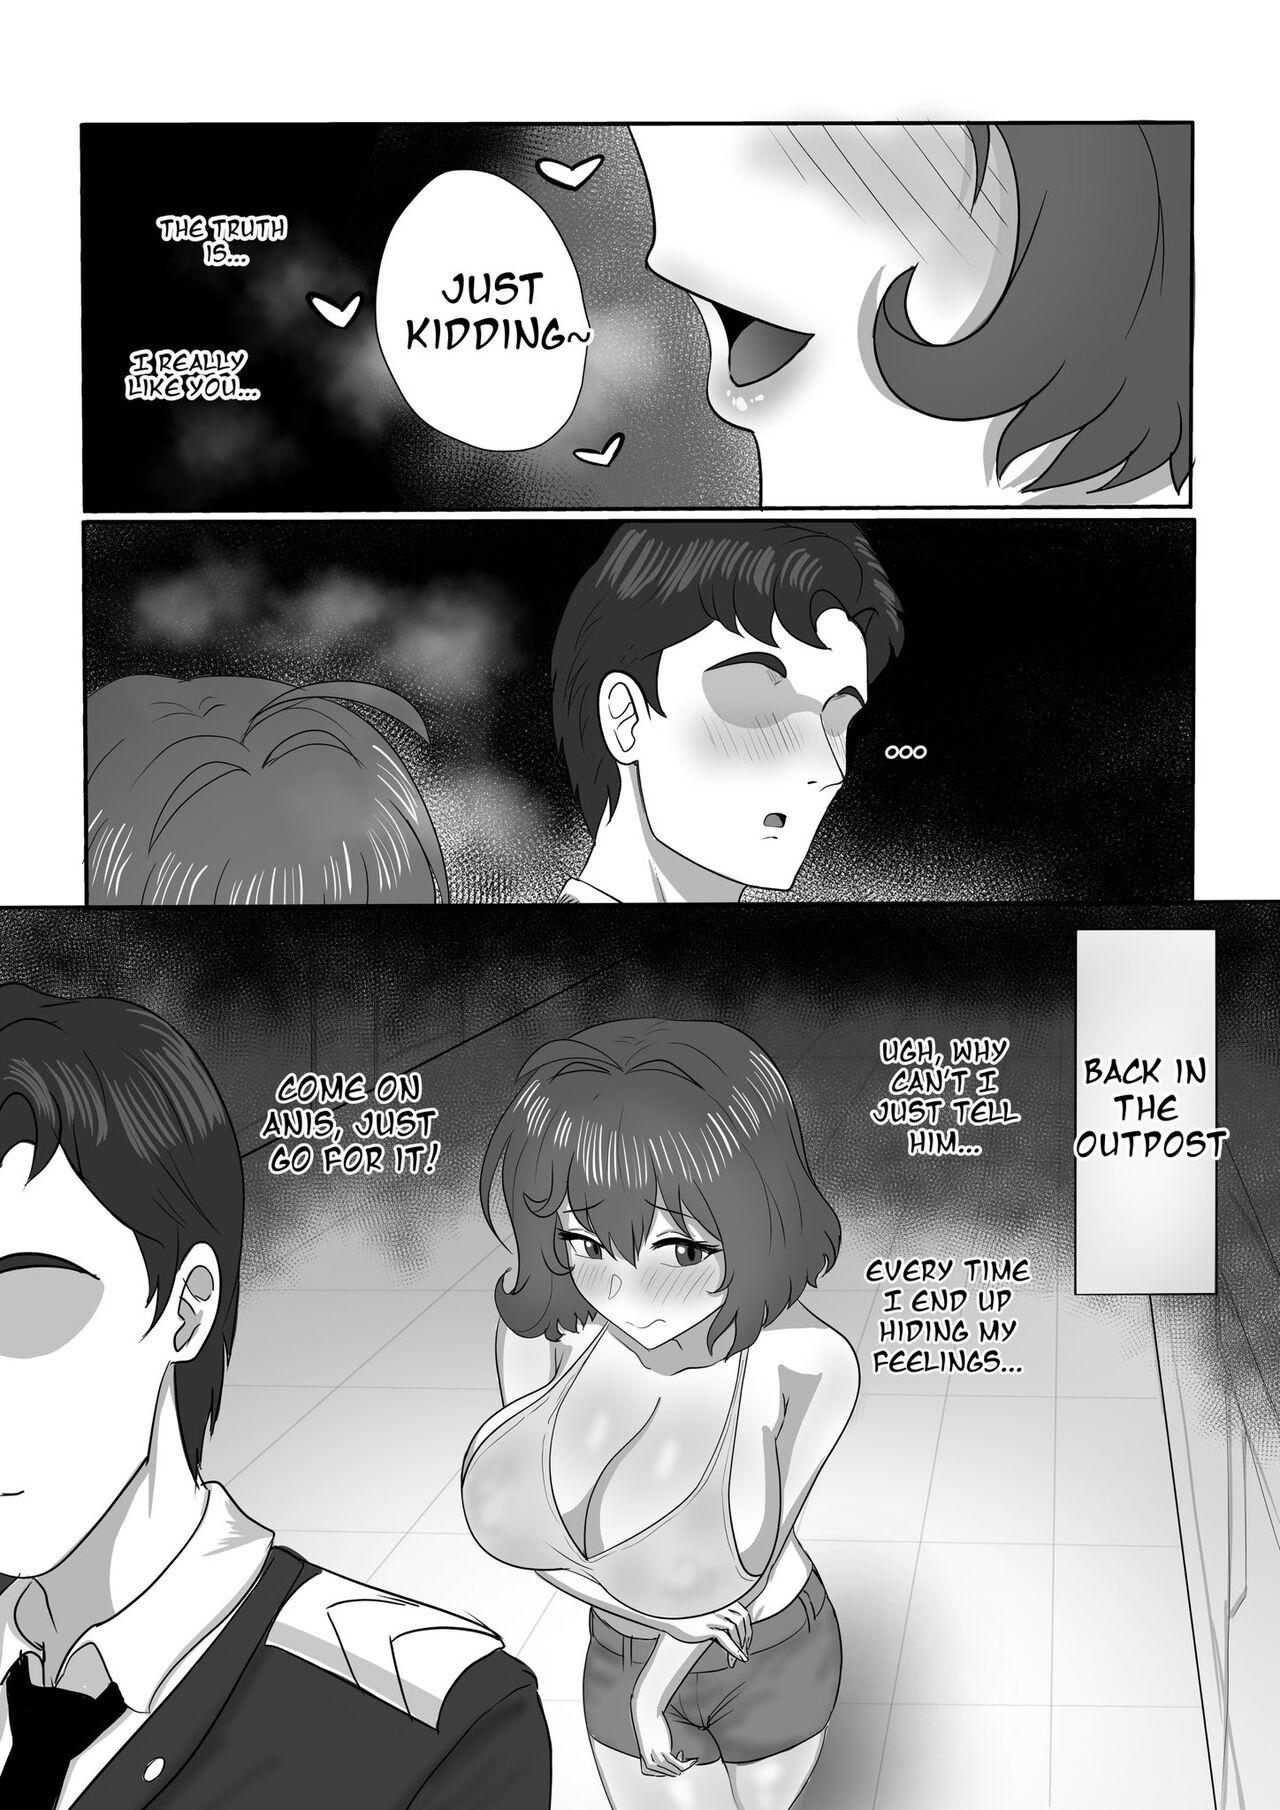 Hard Confession of Love - Goddess of victory nikke Cop - Page 4